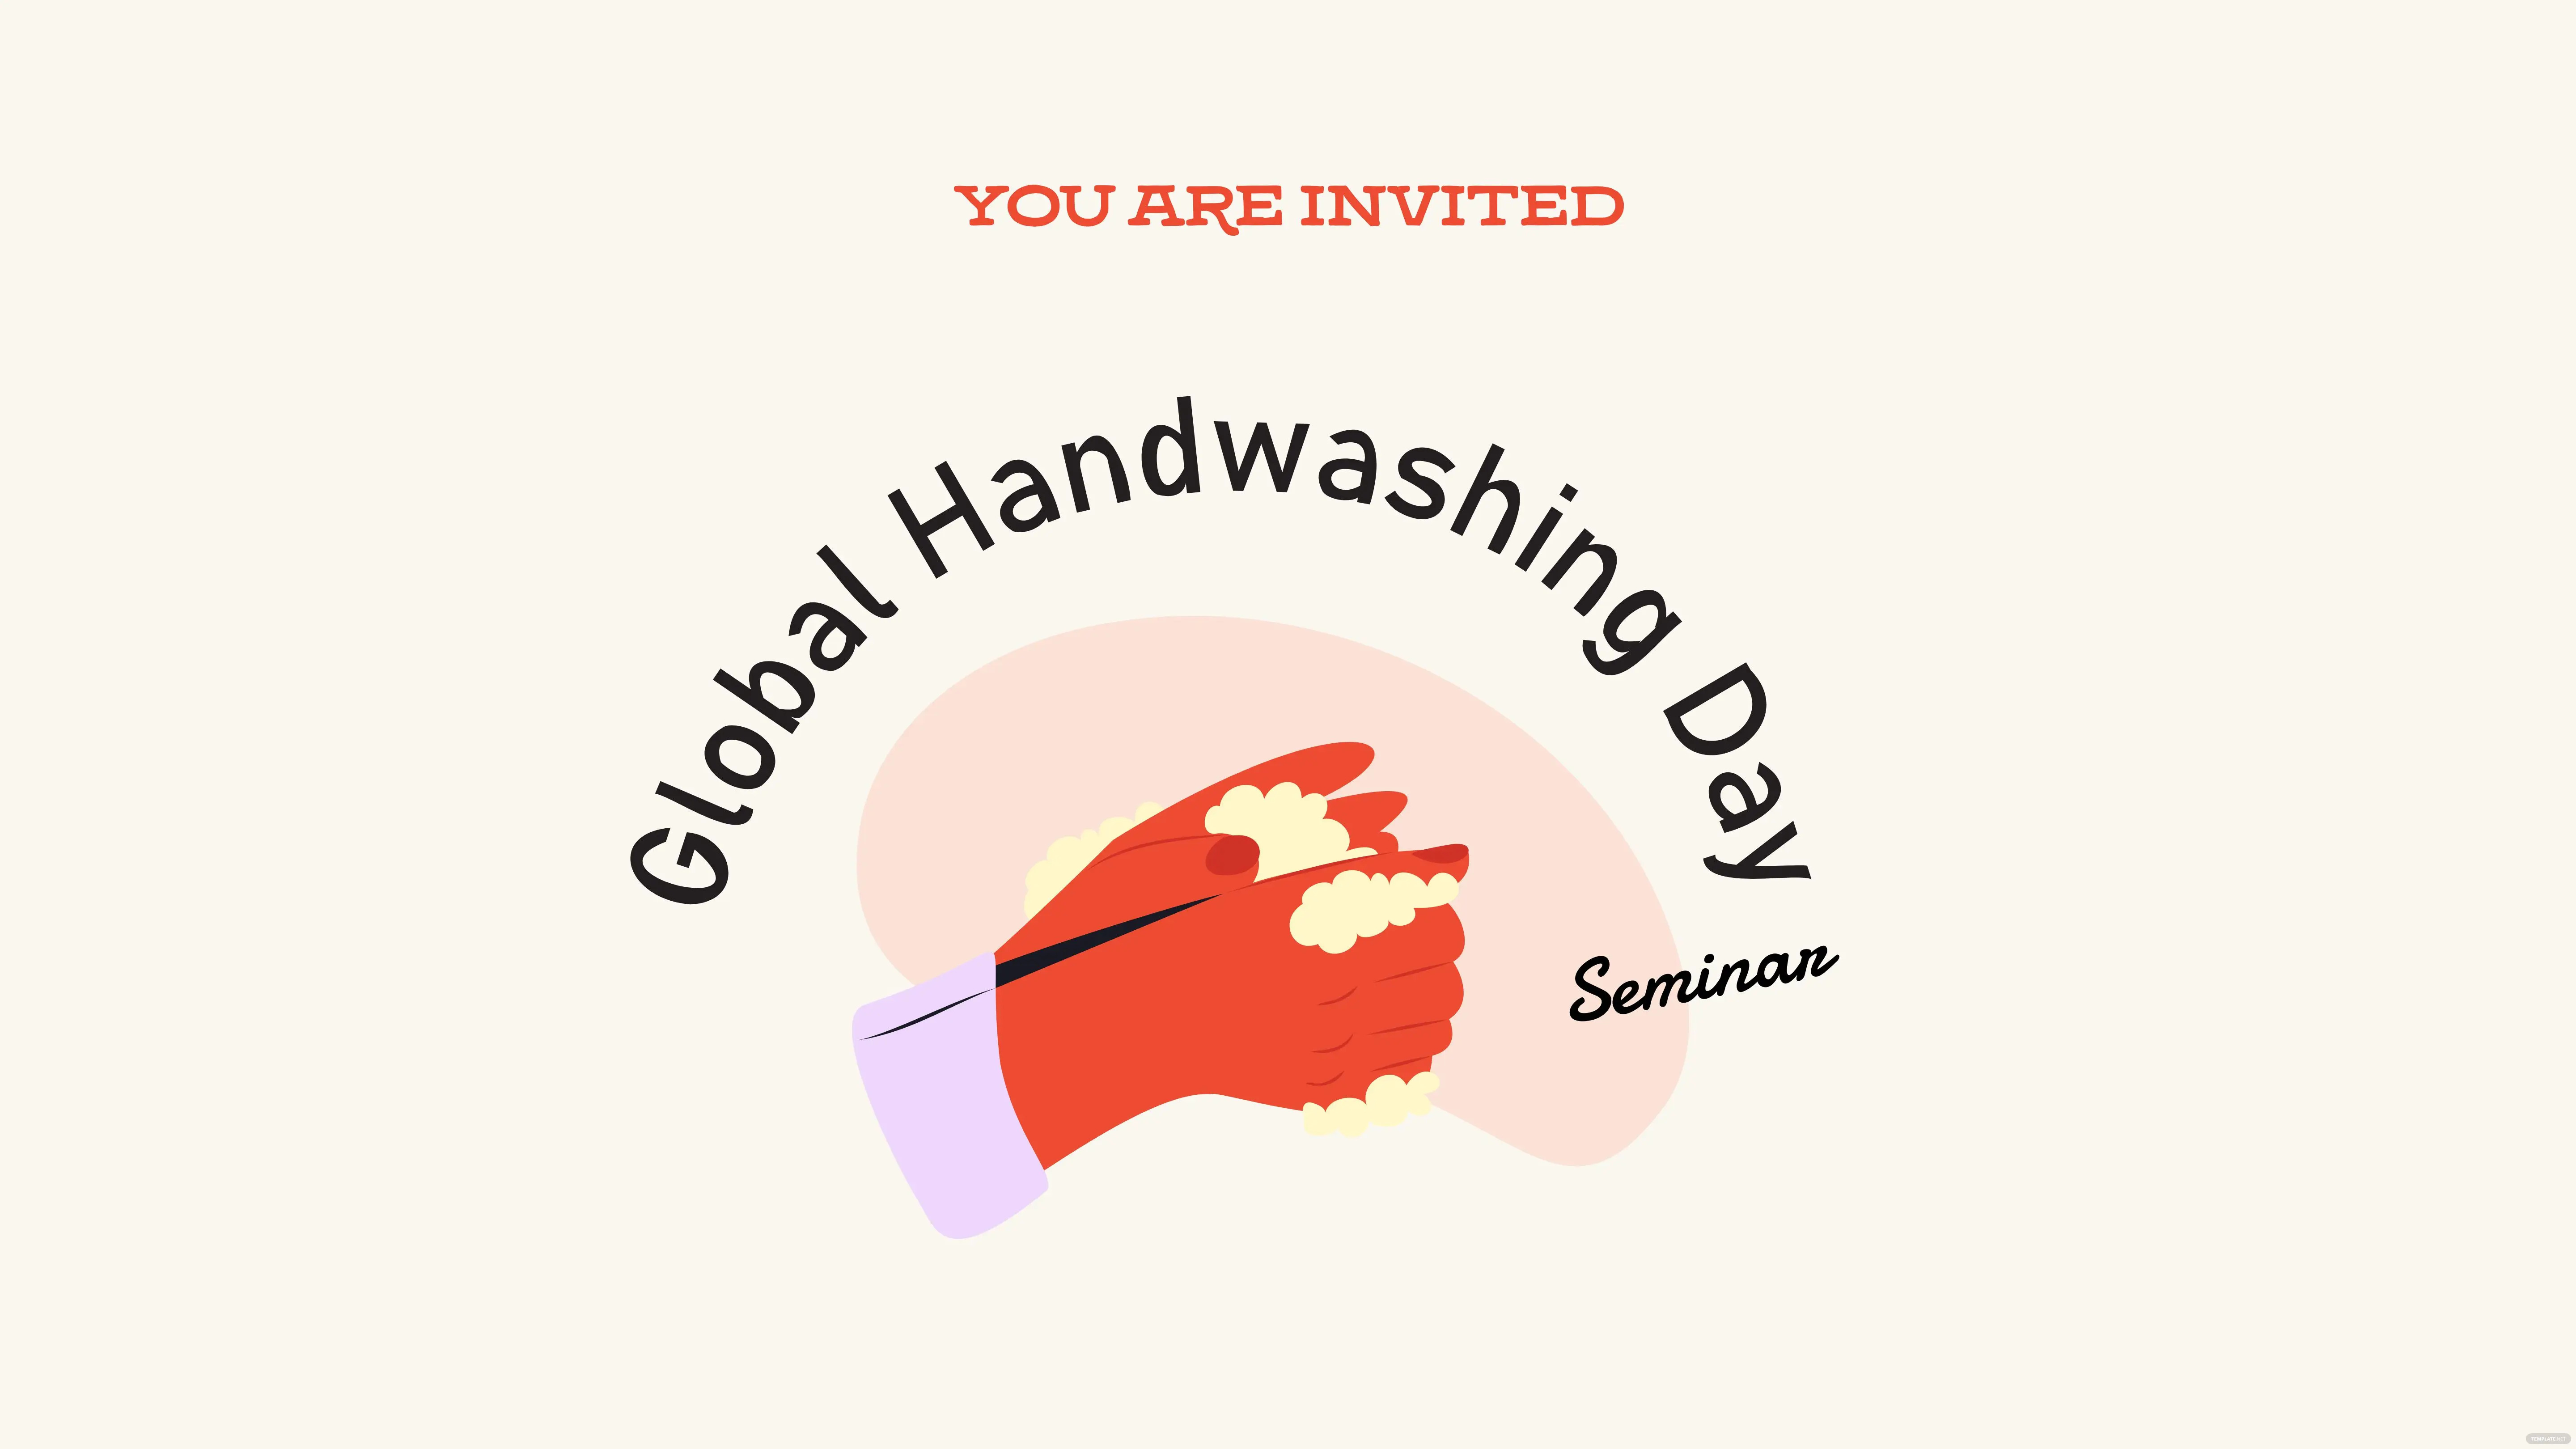 global handwashing day invitation background ideas and examples